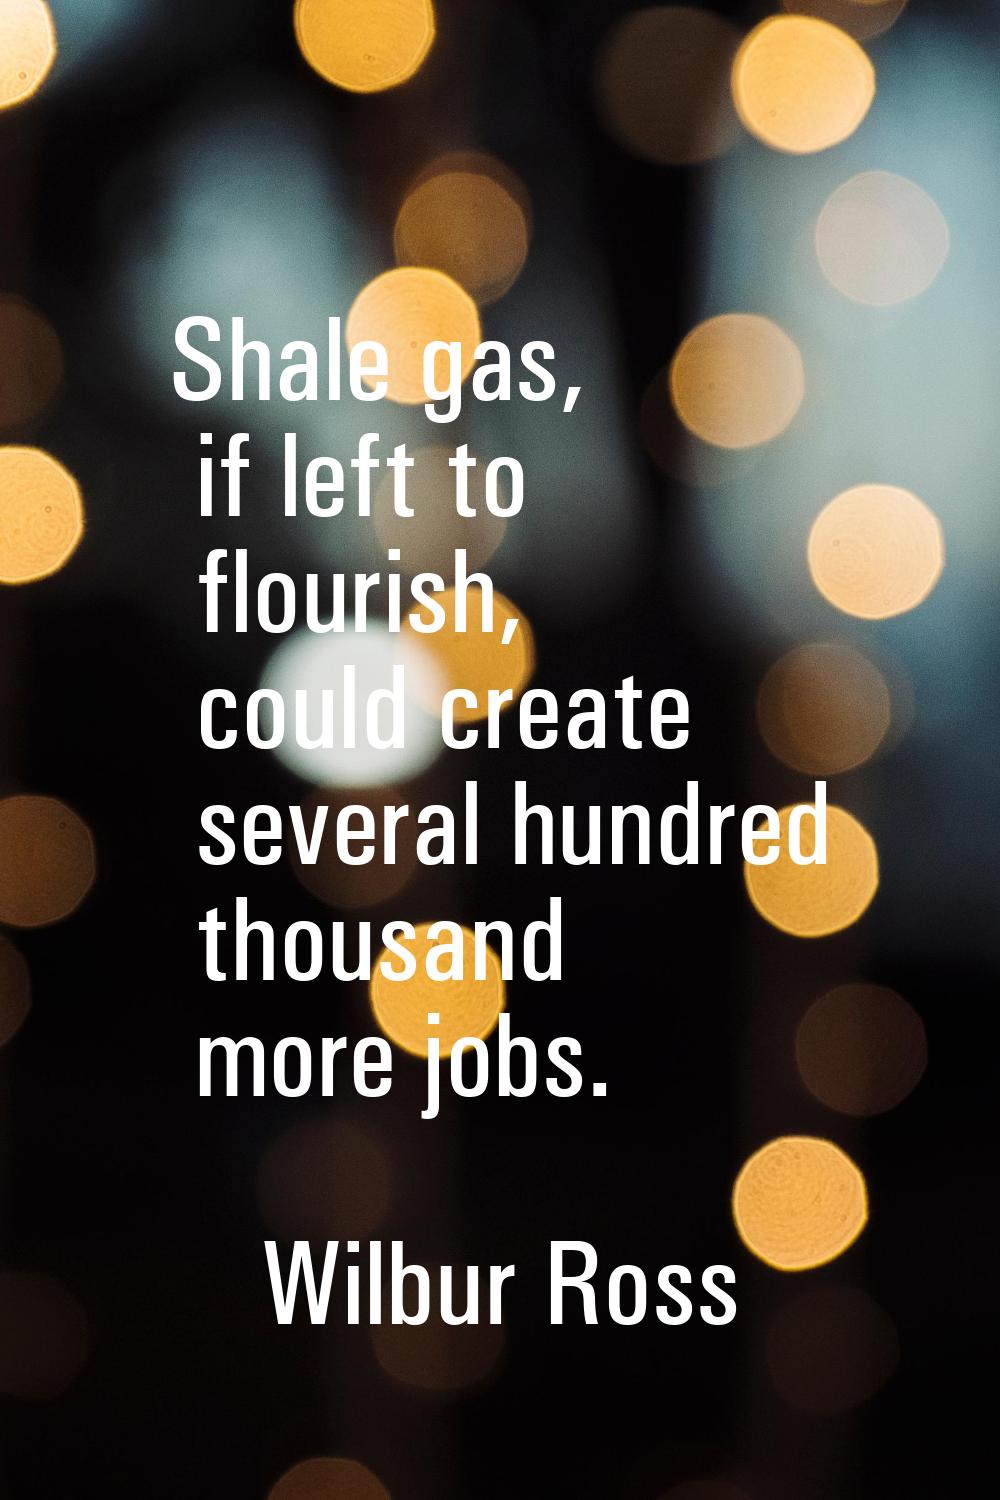 Shale gas, if left to flourish, could create several hundred thousand more jobs.